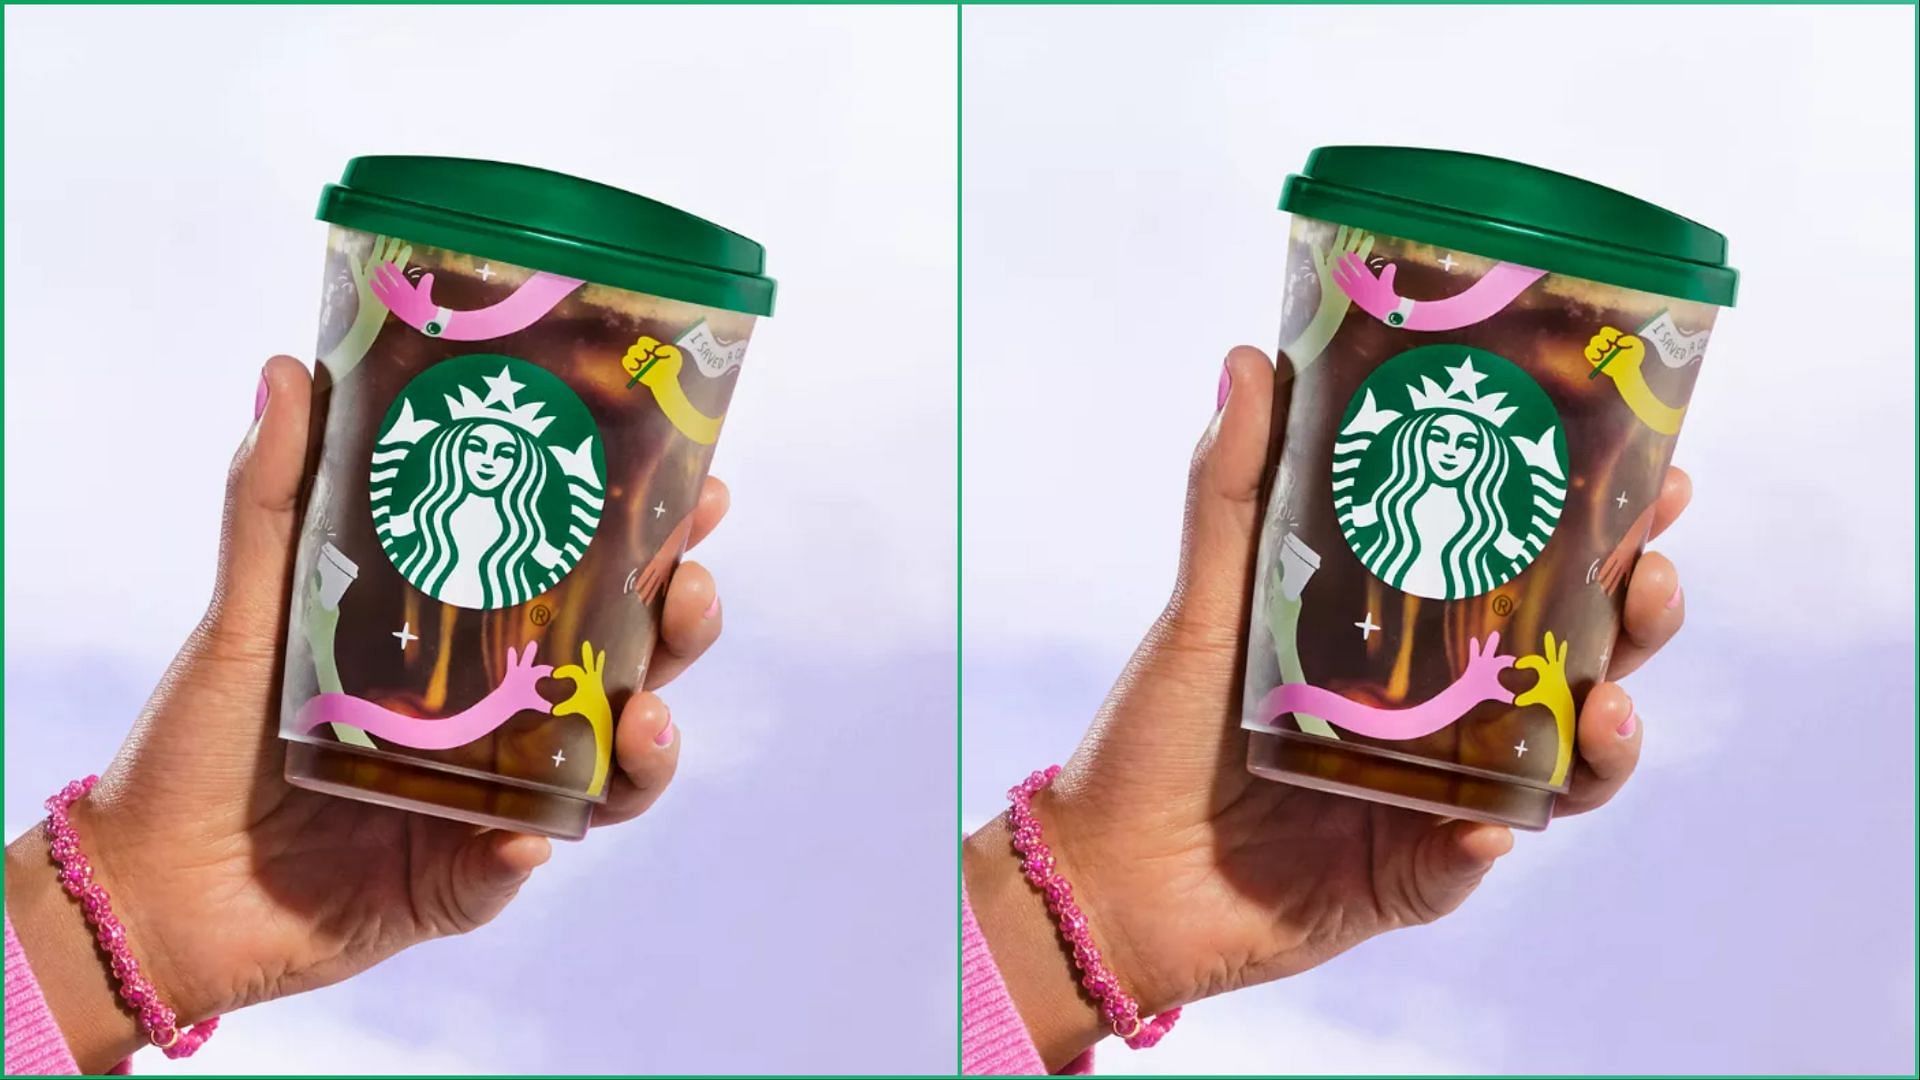 FREE Starbucks Reusable Cup When You Spend $5 Using PayPal - Budget Savvy  Diva